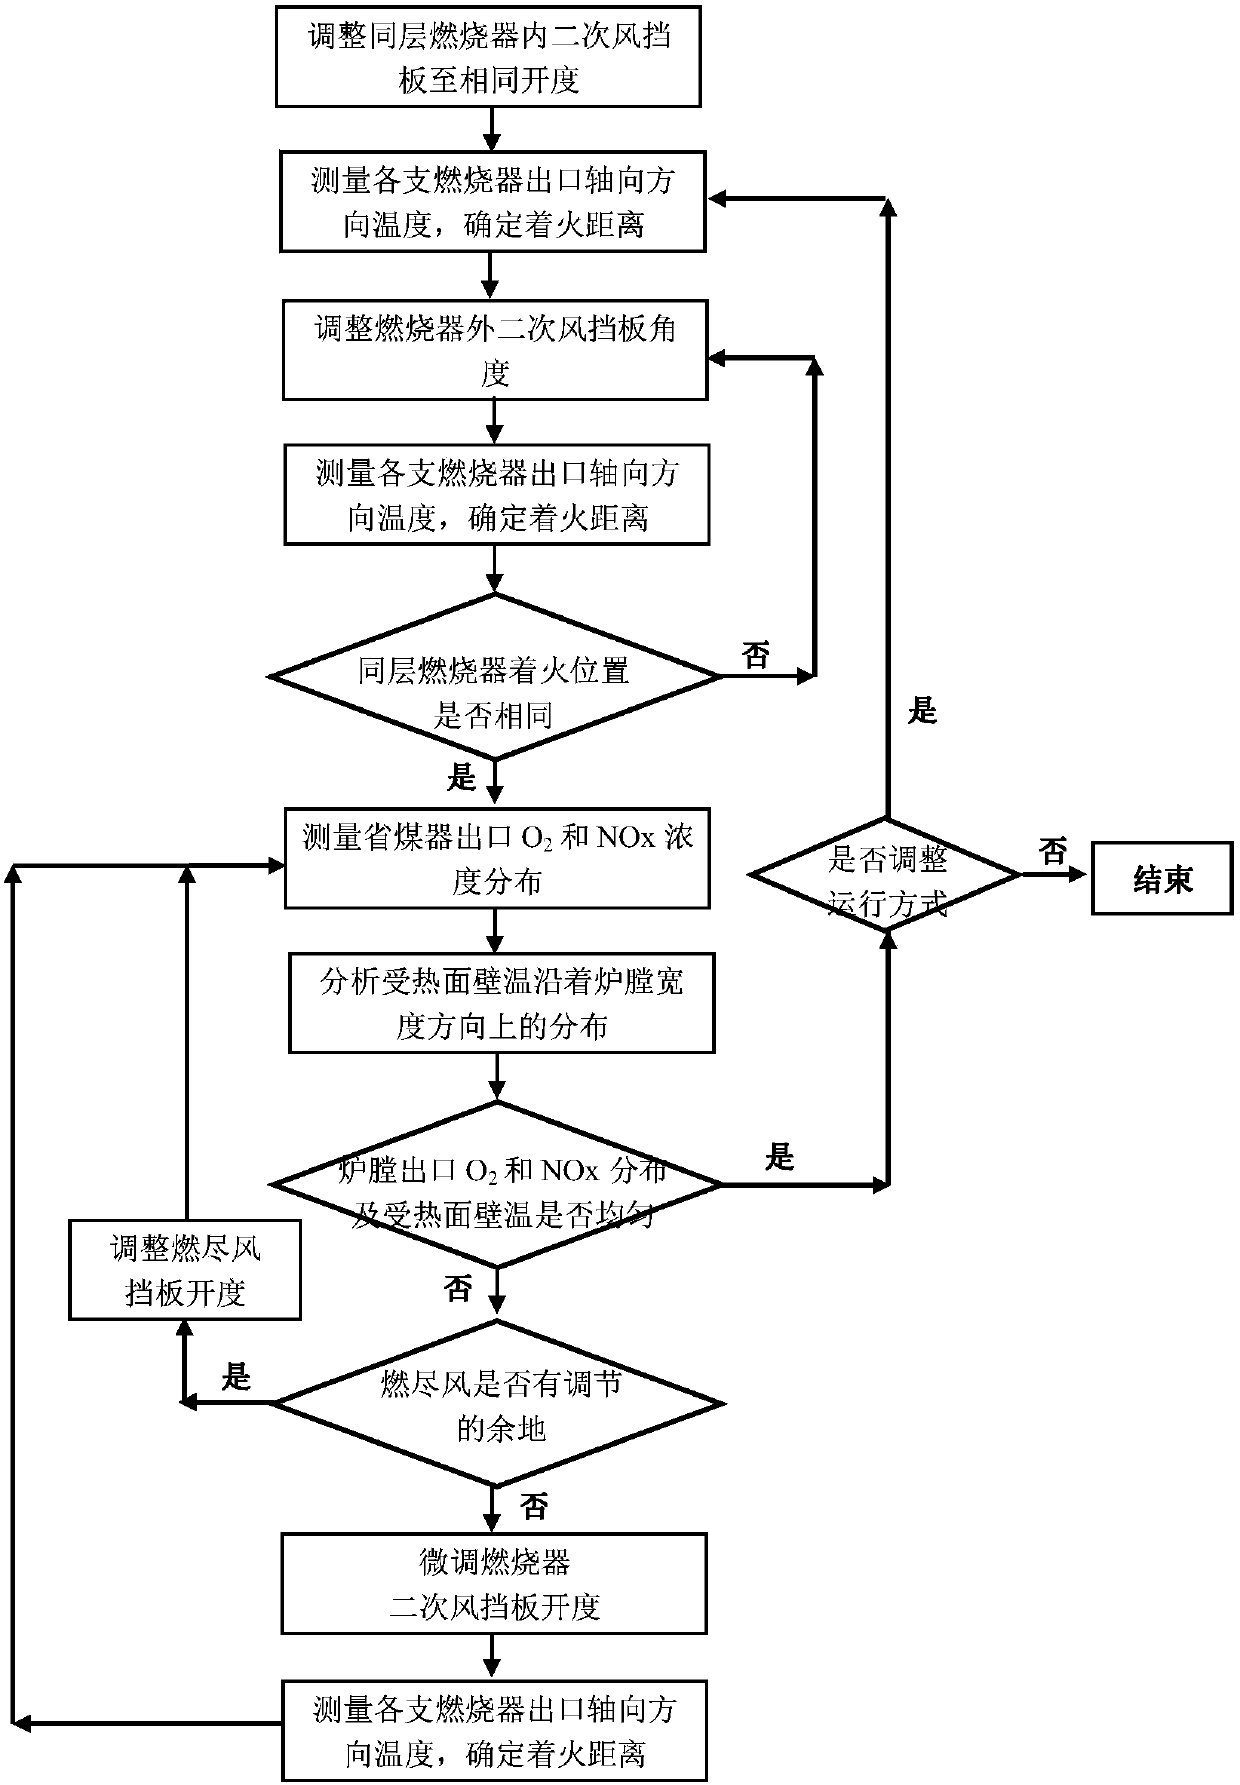 Collaborative optimization method for coal-fired power plant boiler system and denitrification system operation